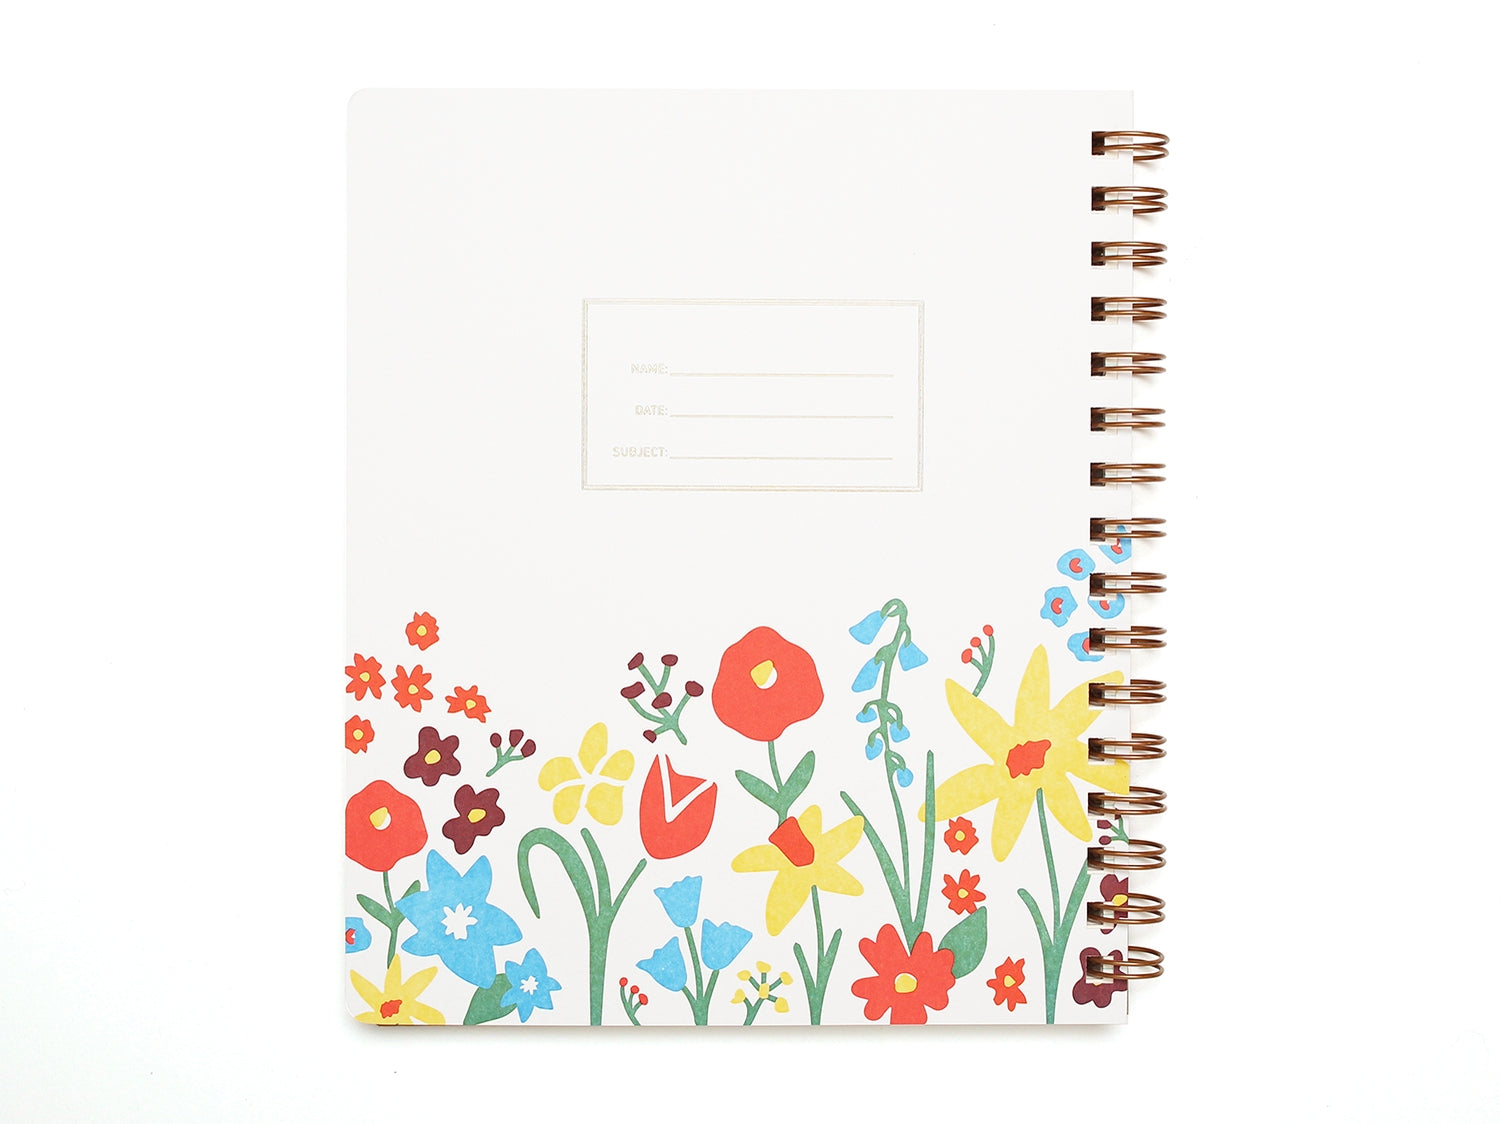 White background with garden flowers at the bottom of cover in red, yellow, blue and green with embossed rectangle with embossed text says, “Name”, “Date”, and “Subject”. Brass coil binding on right side. 